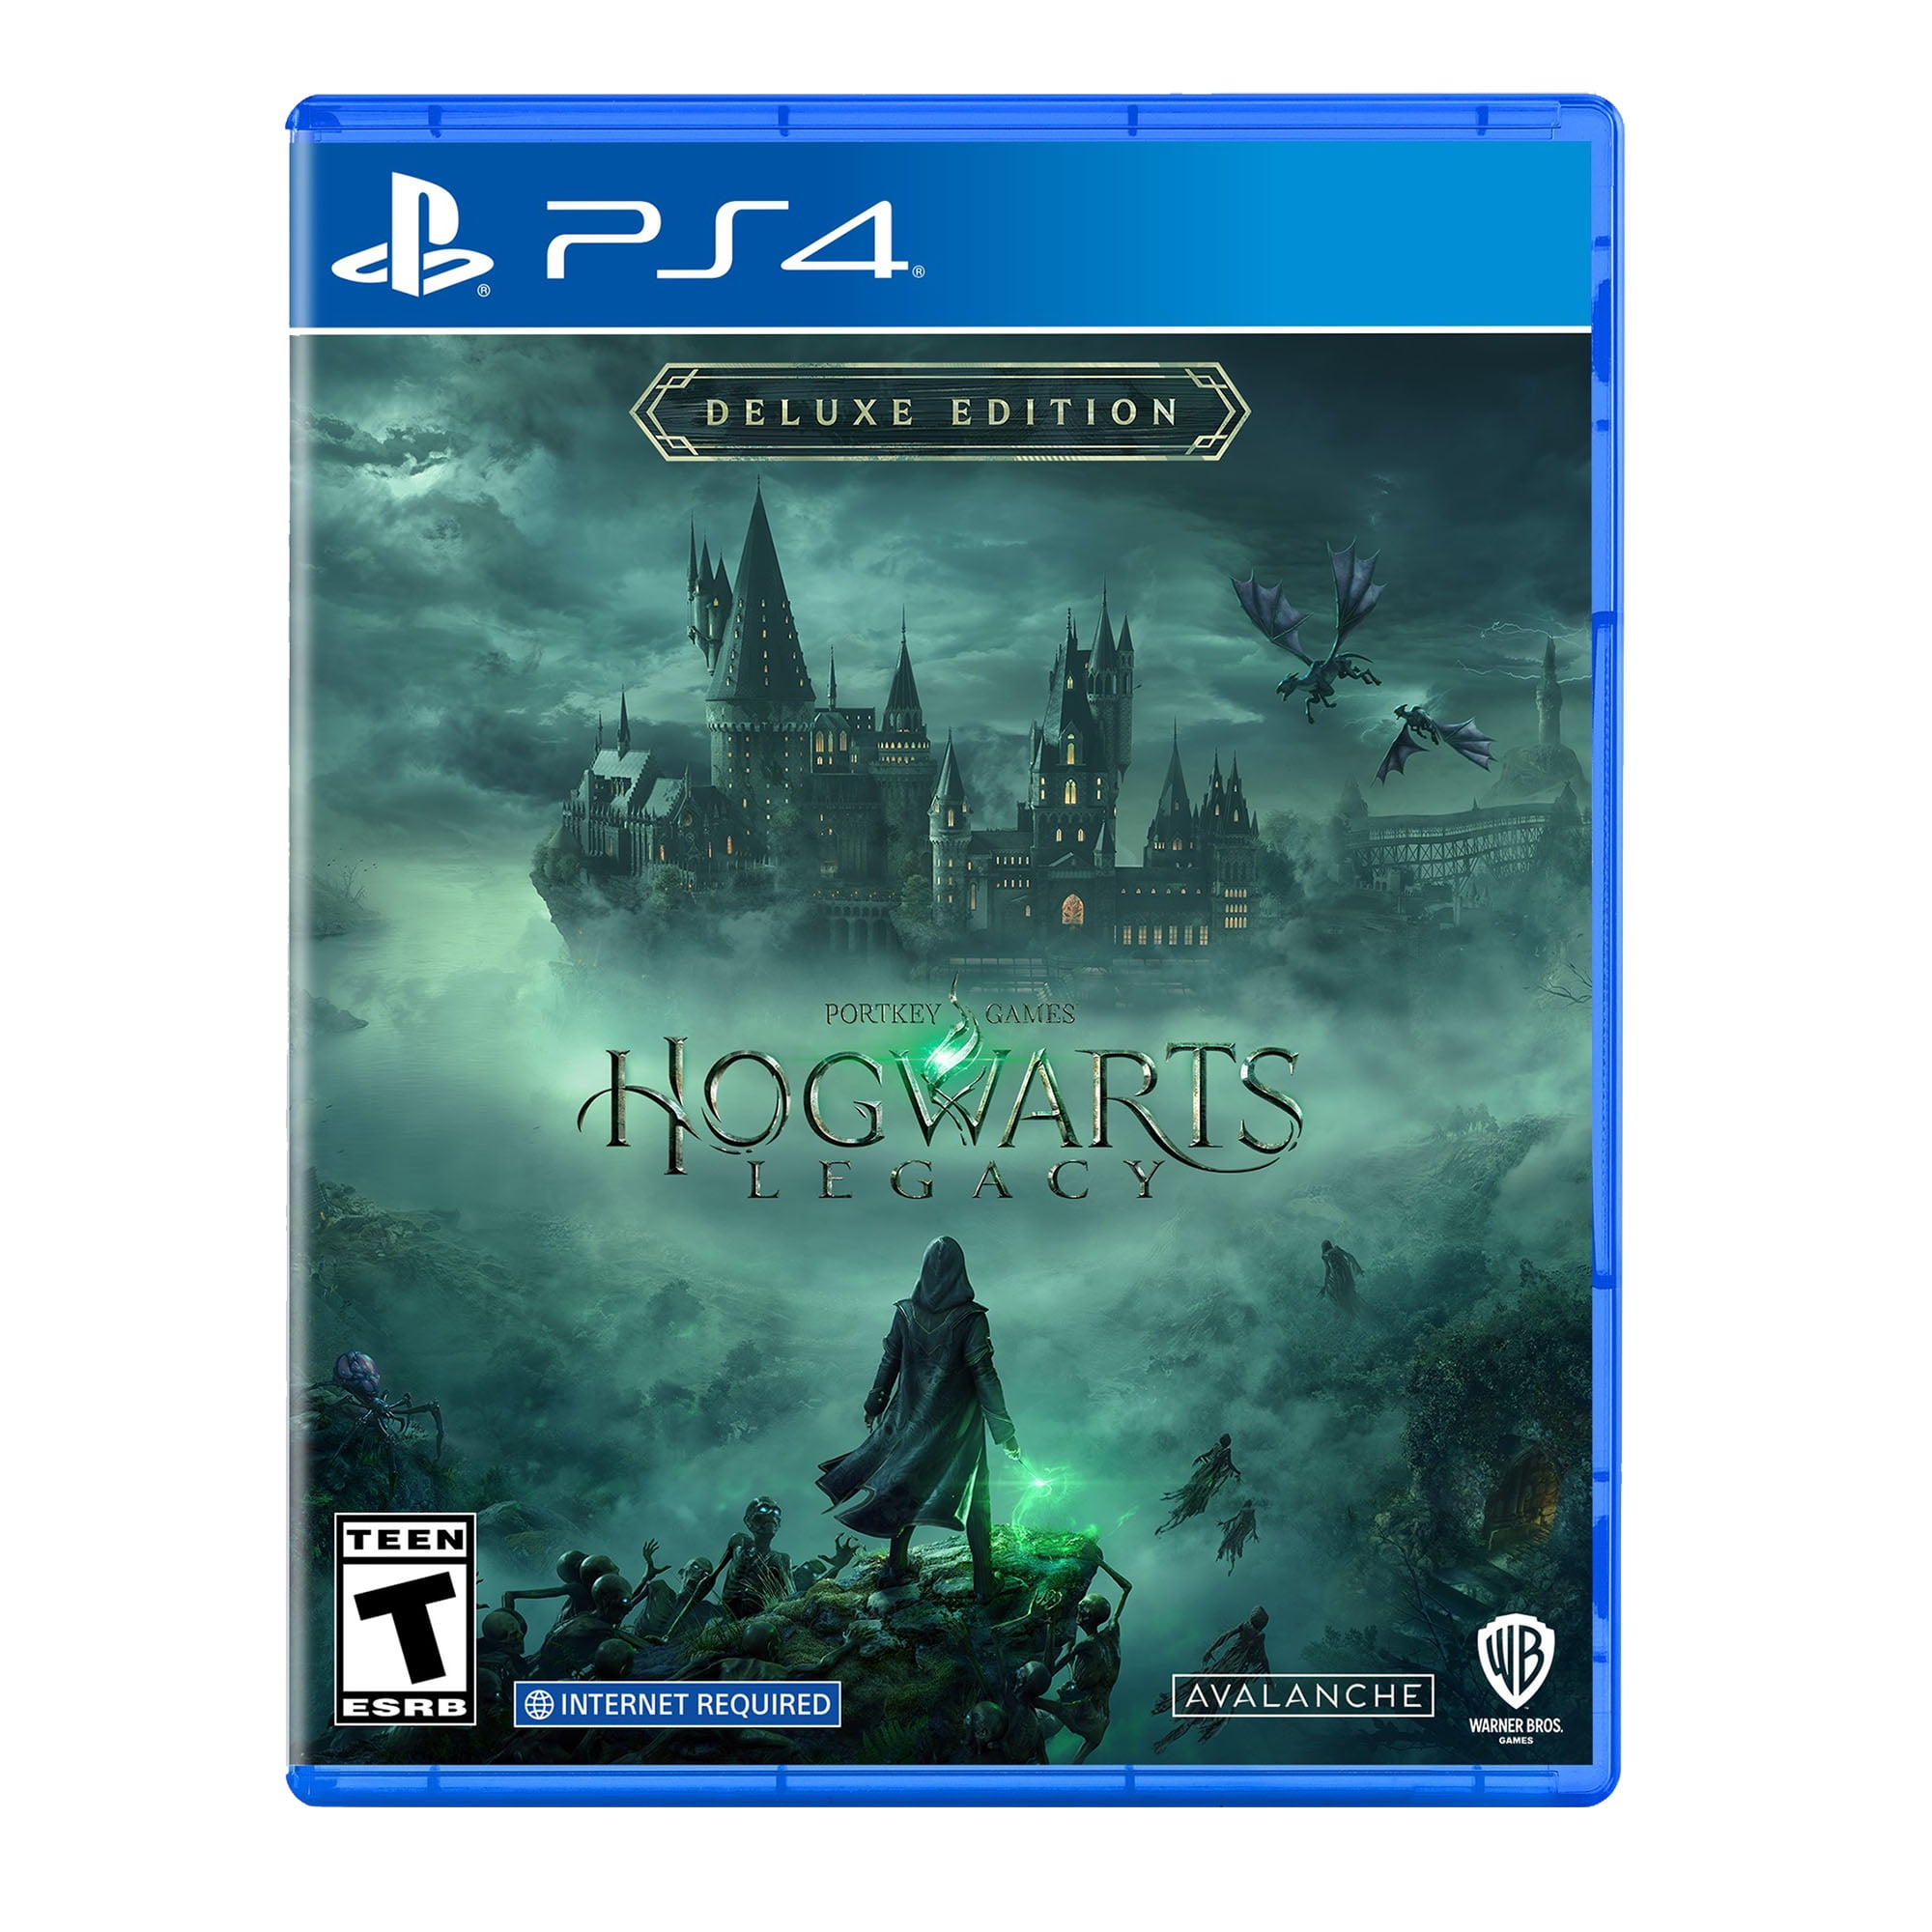 Hogwarts Legacy Standard Deluxe Edition PC GAME Steam BRAND NEW GENUINE